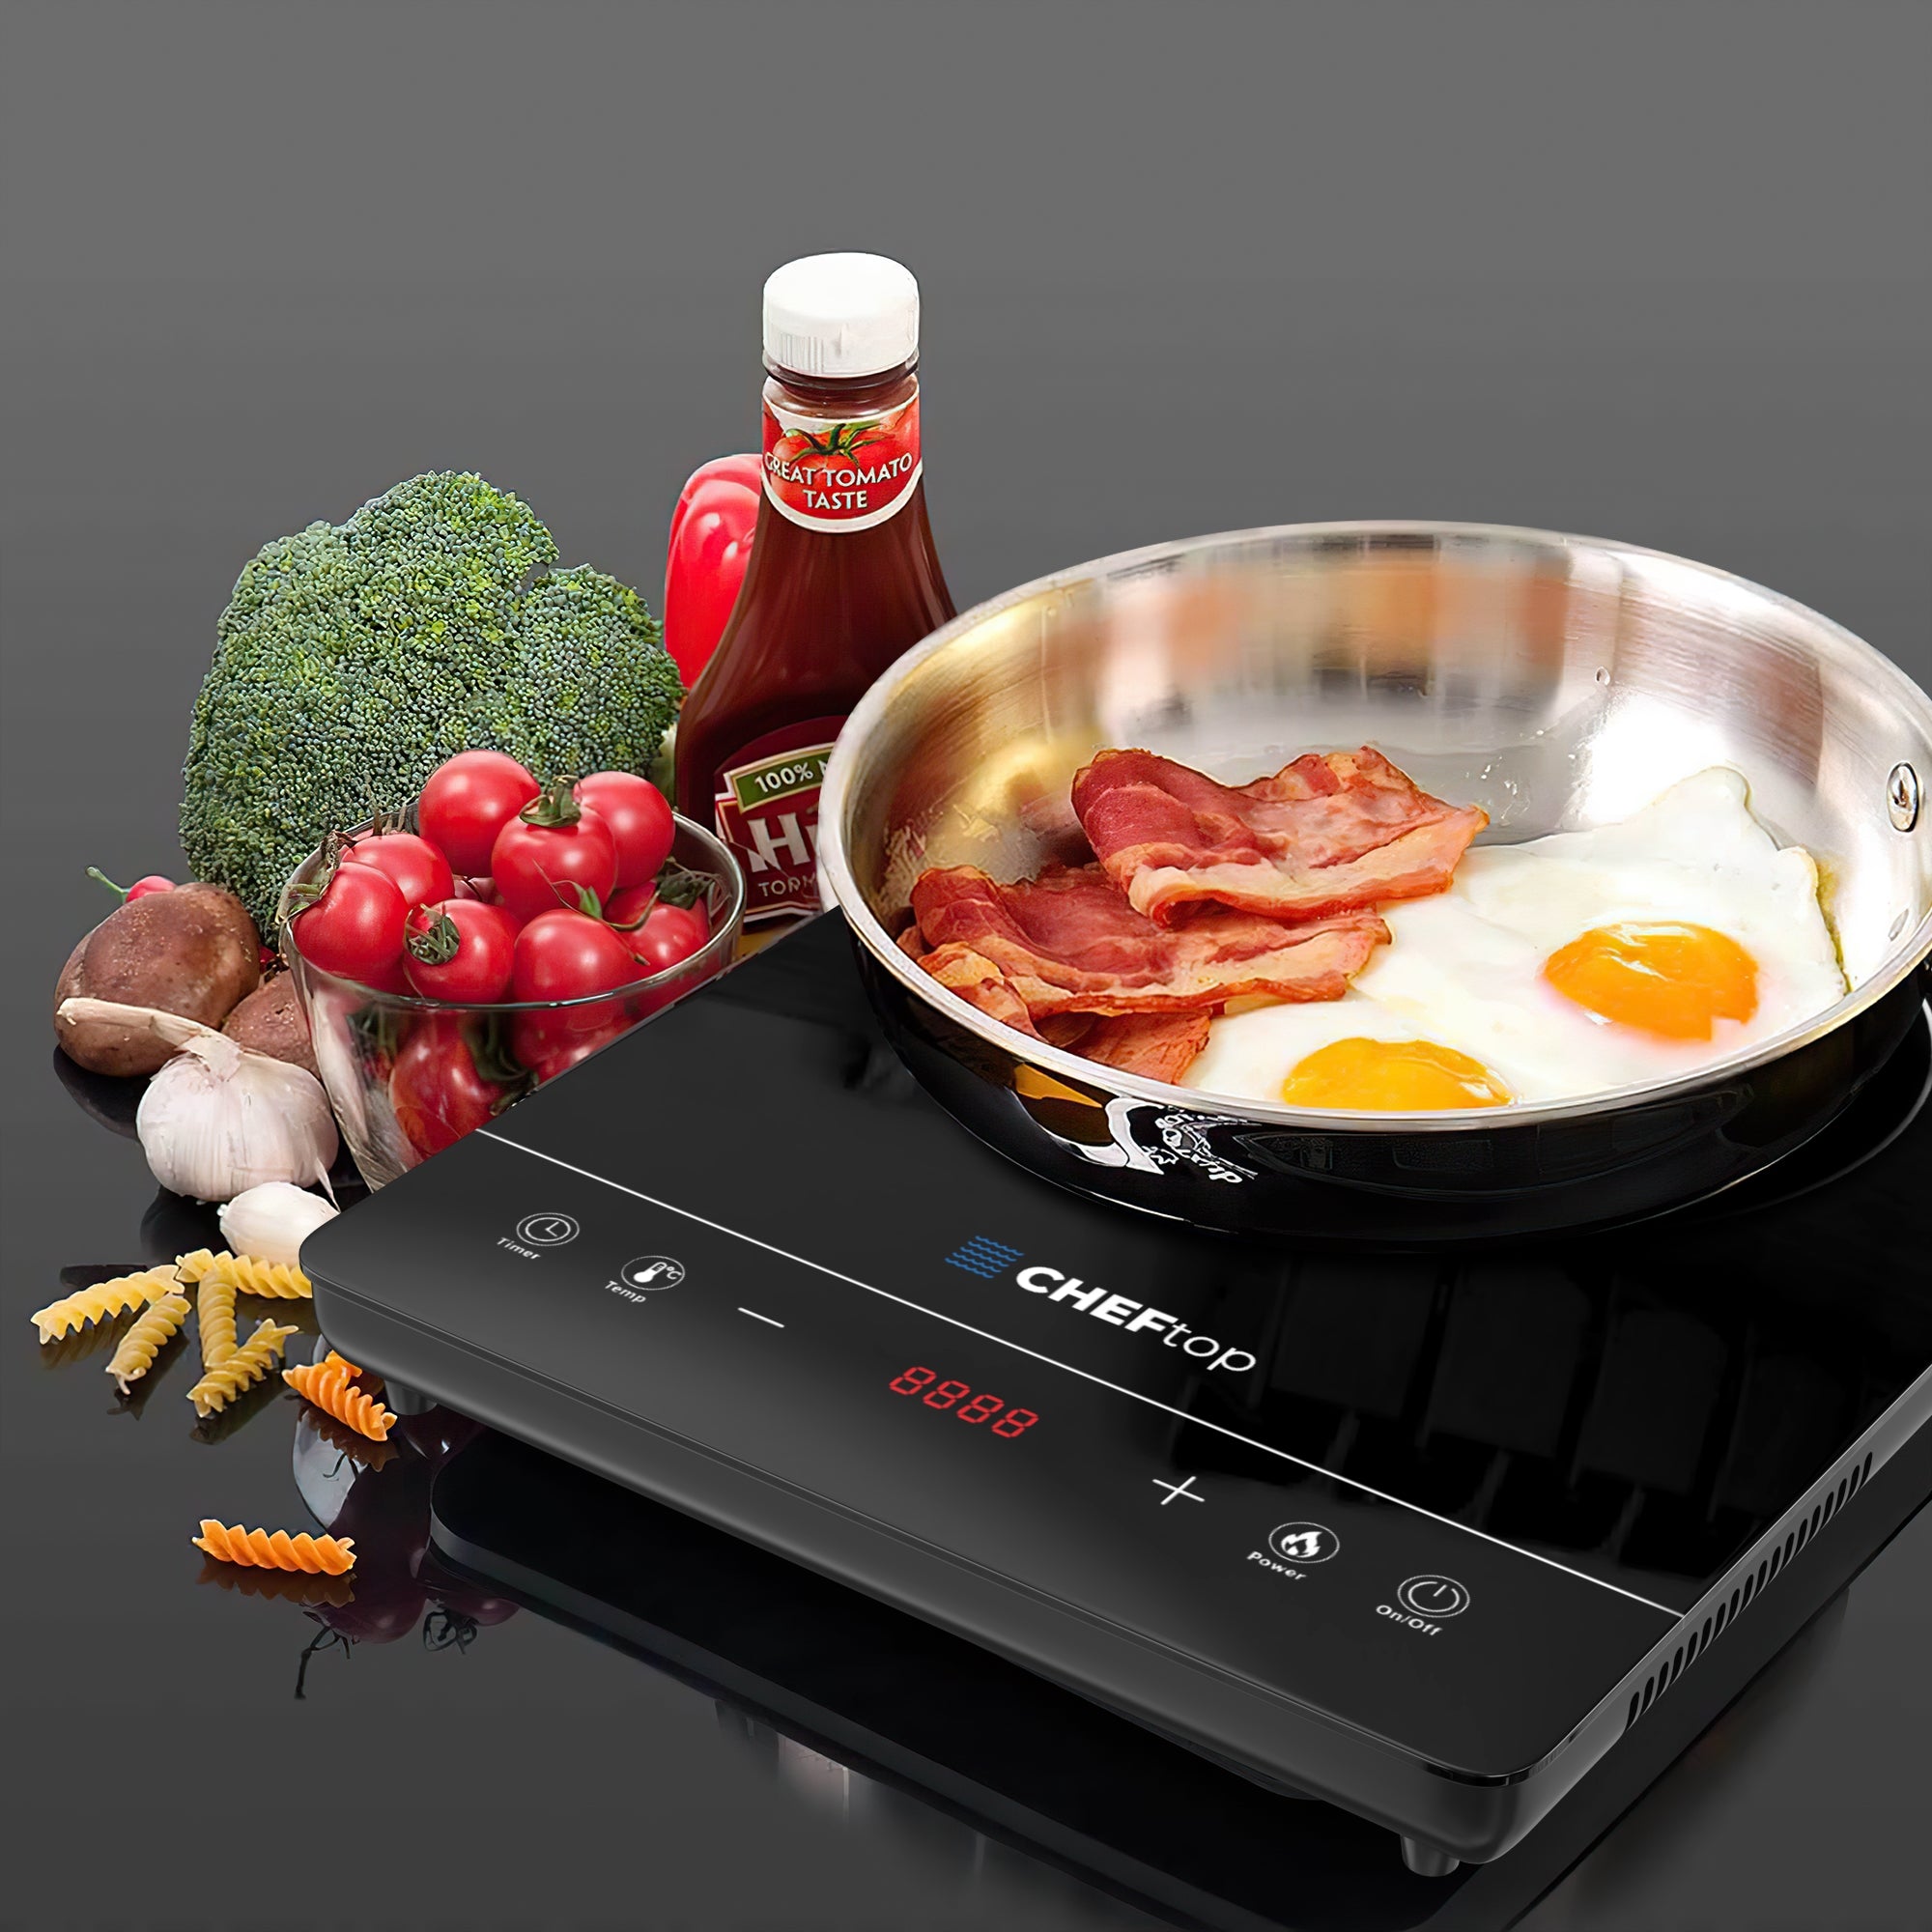 Drinkpod Cheftop 10-inch Nonstick Frying Pan For Induction, Gas